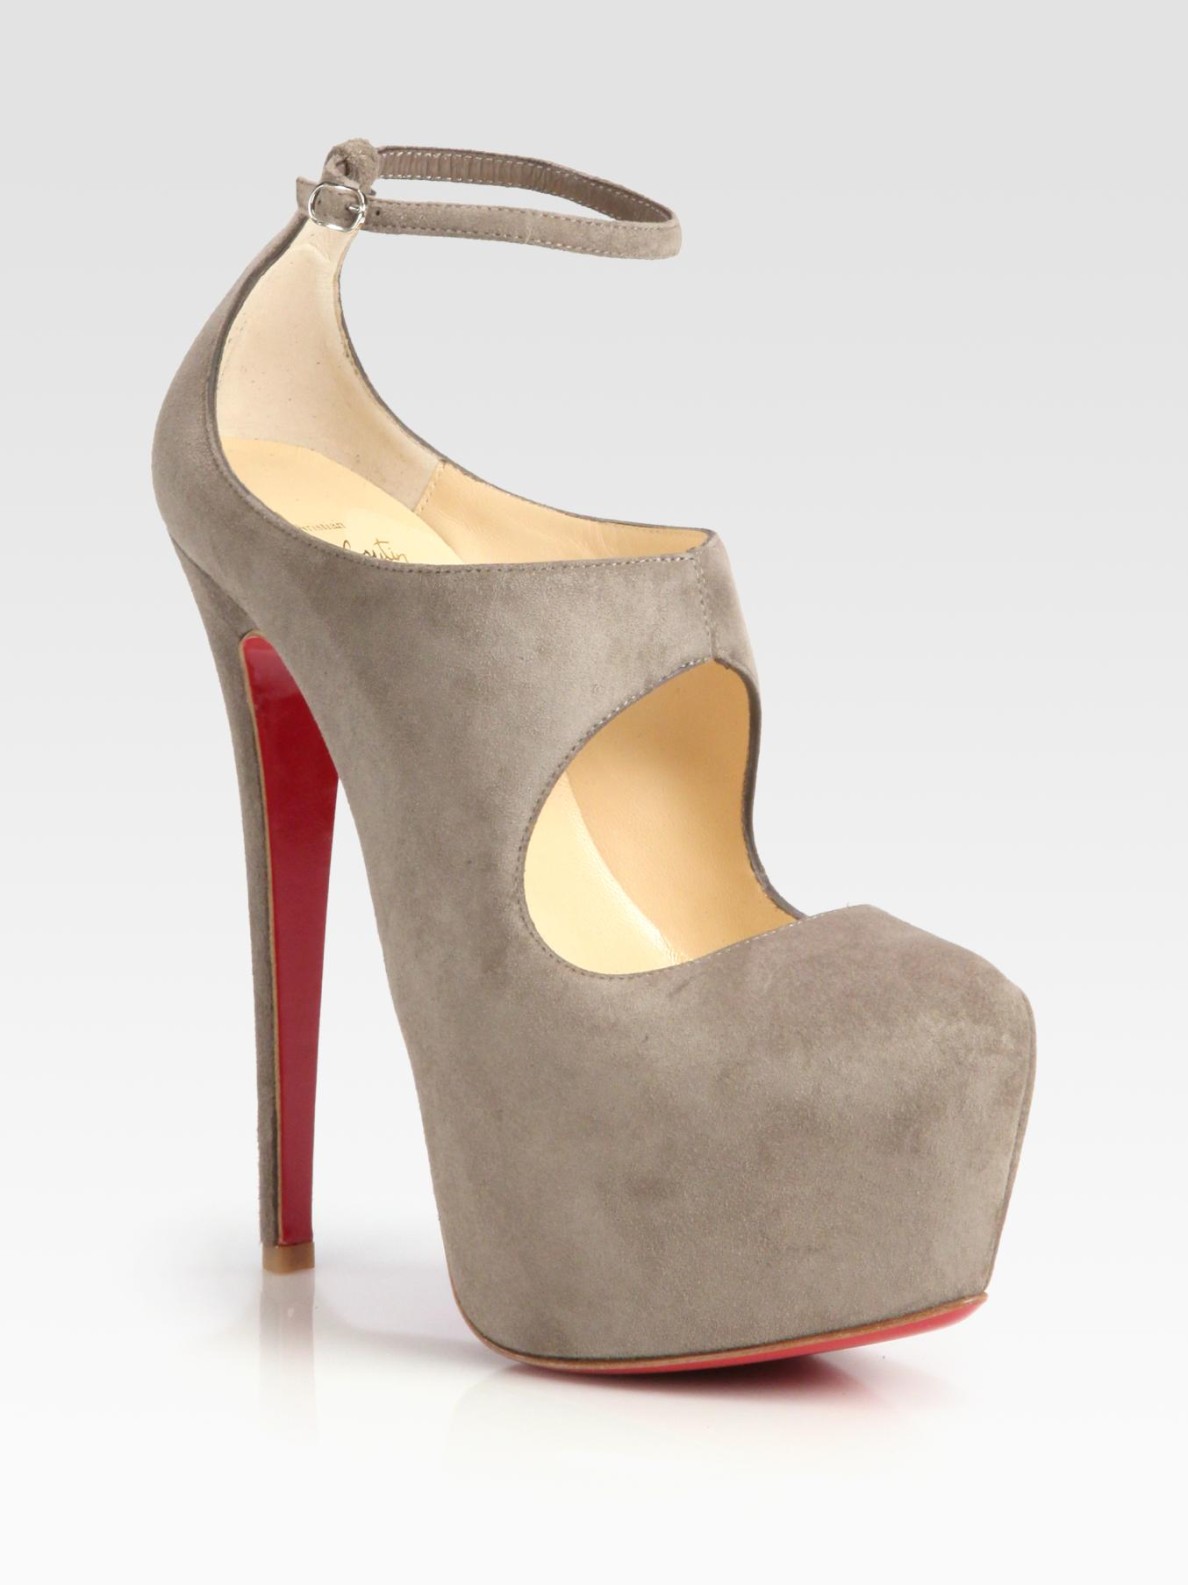 Christian louboutin Maillot Suede Mary Jane Platform Pumps in ...